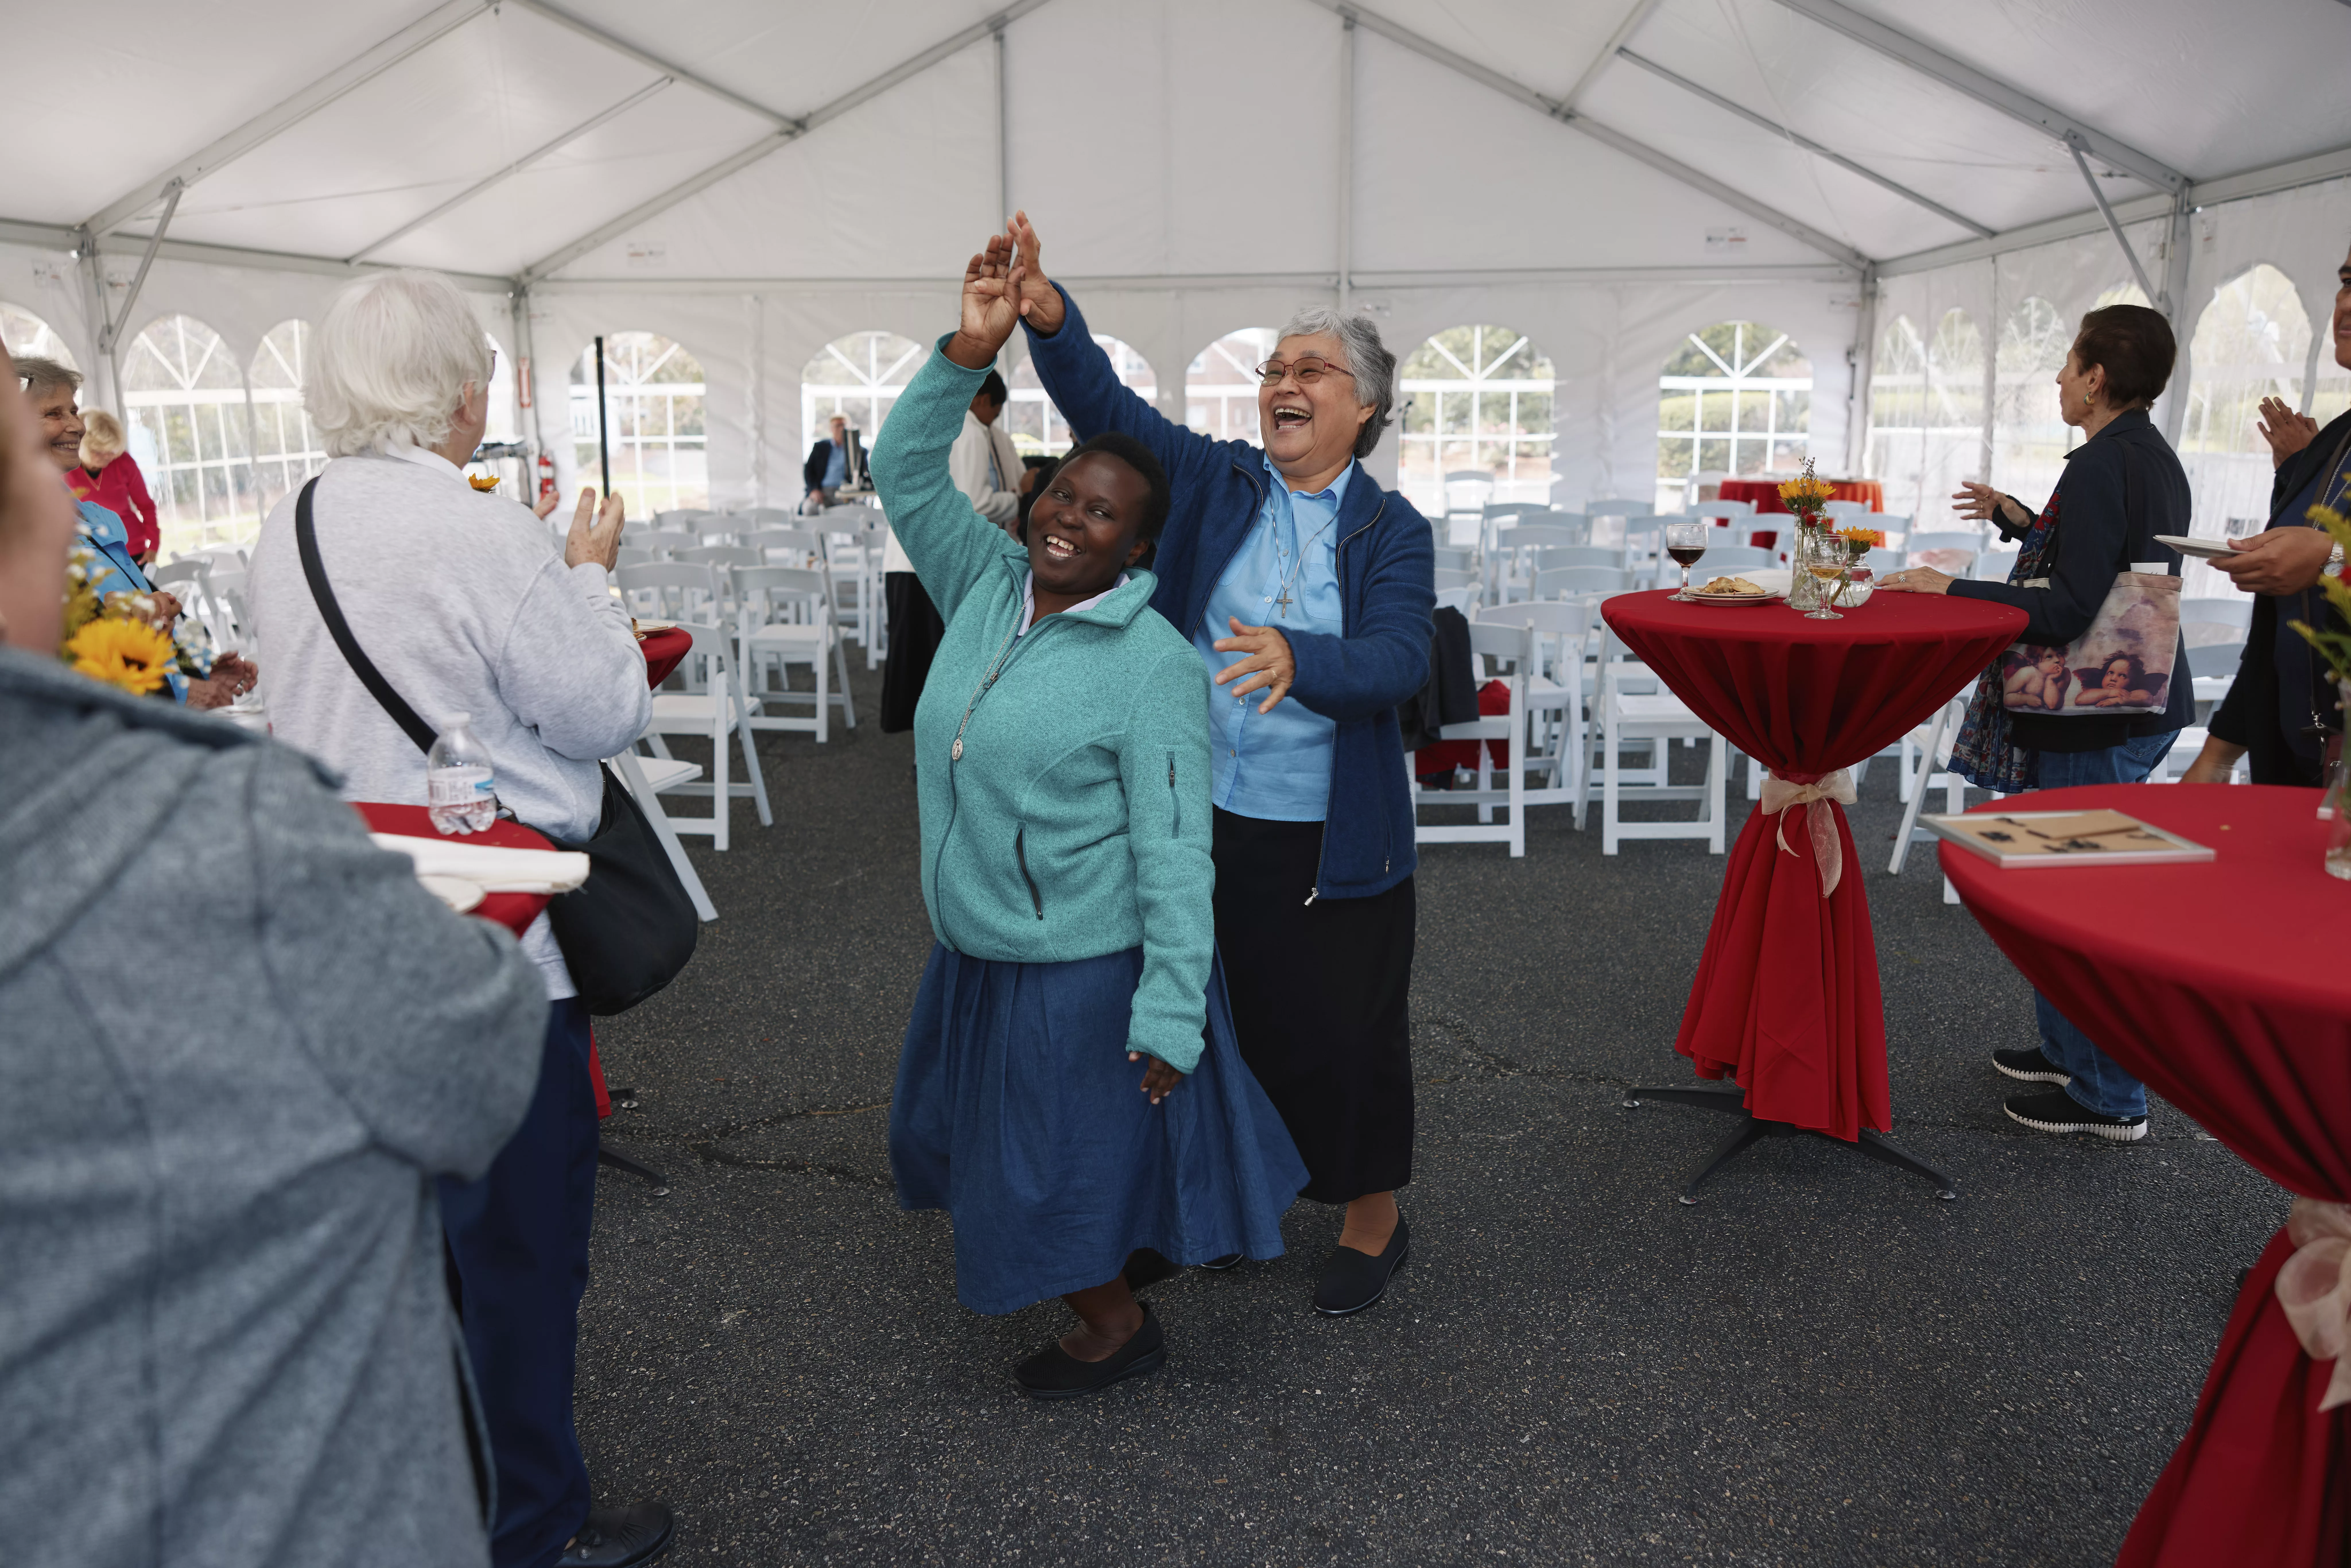 Marist Sisters Dancing to the Sounds of Elvis